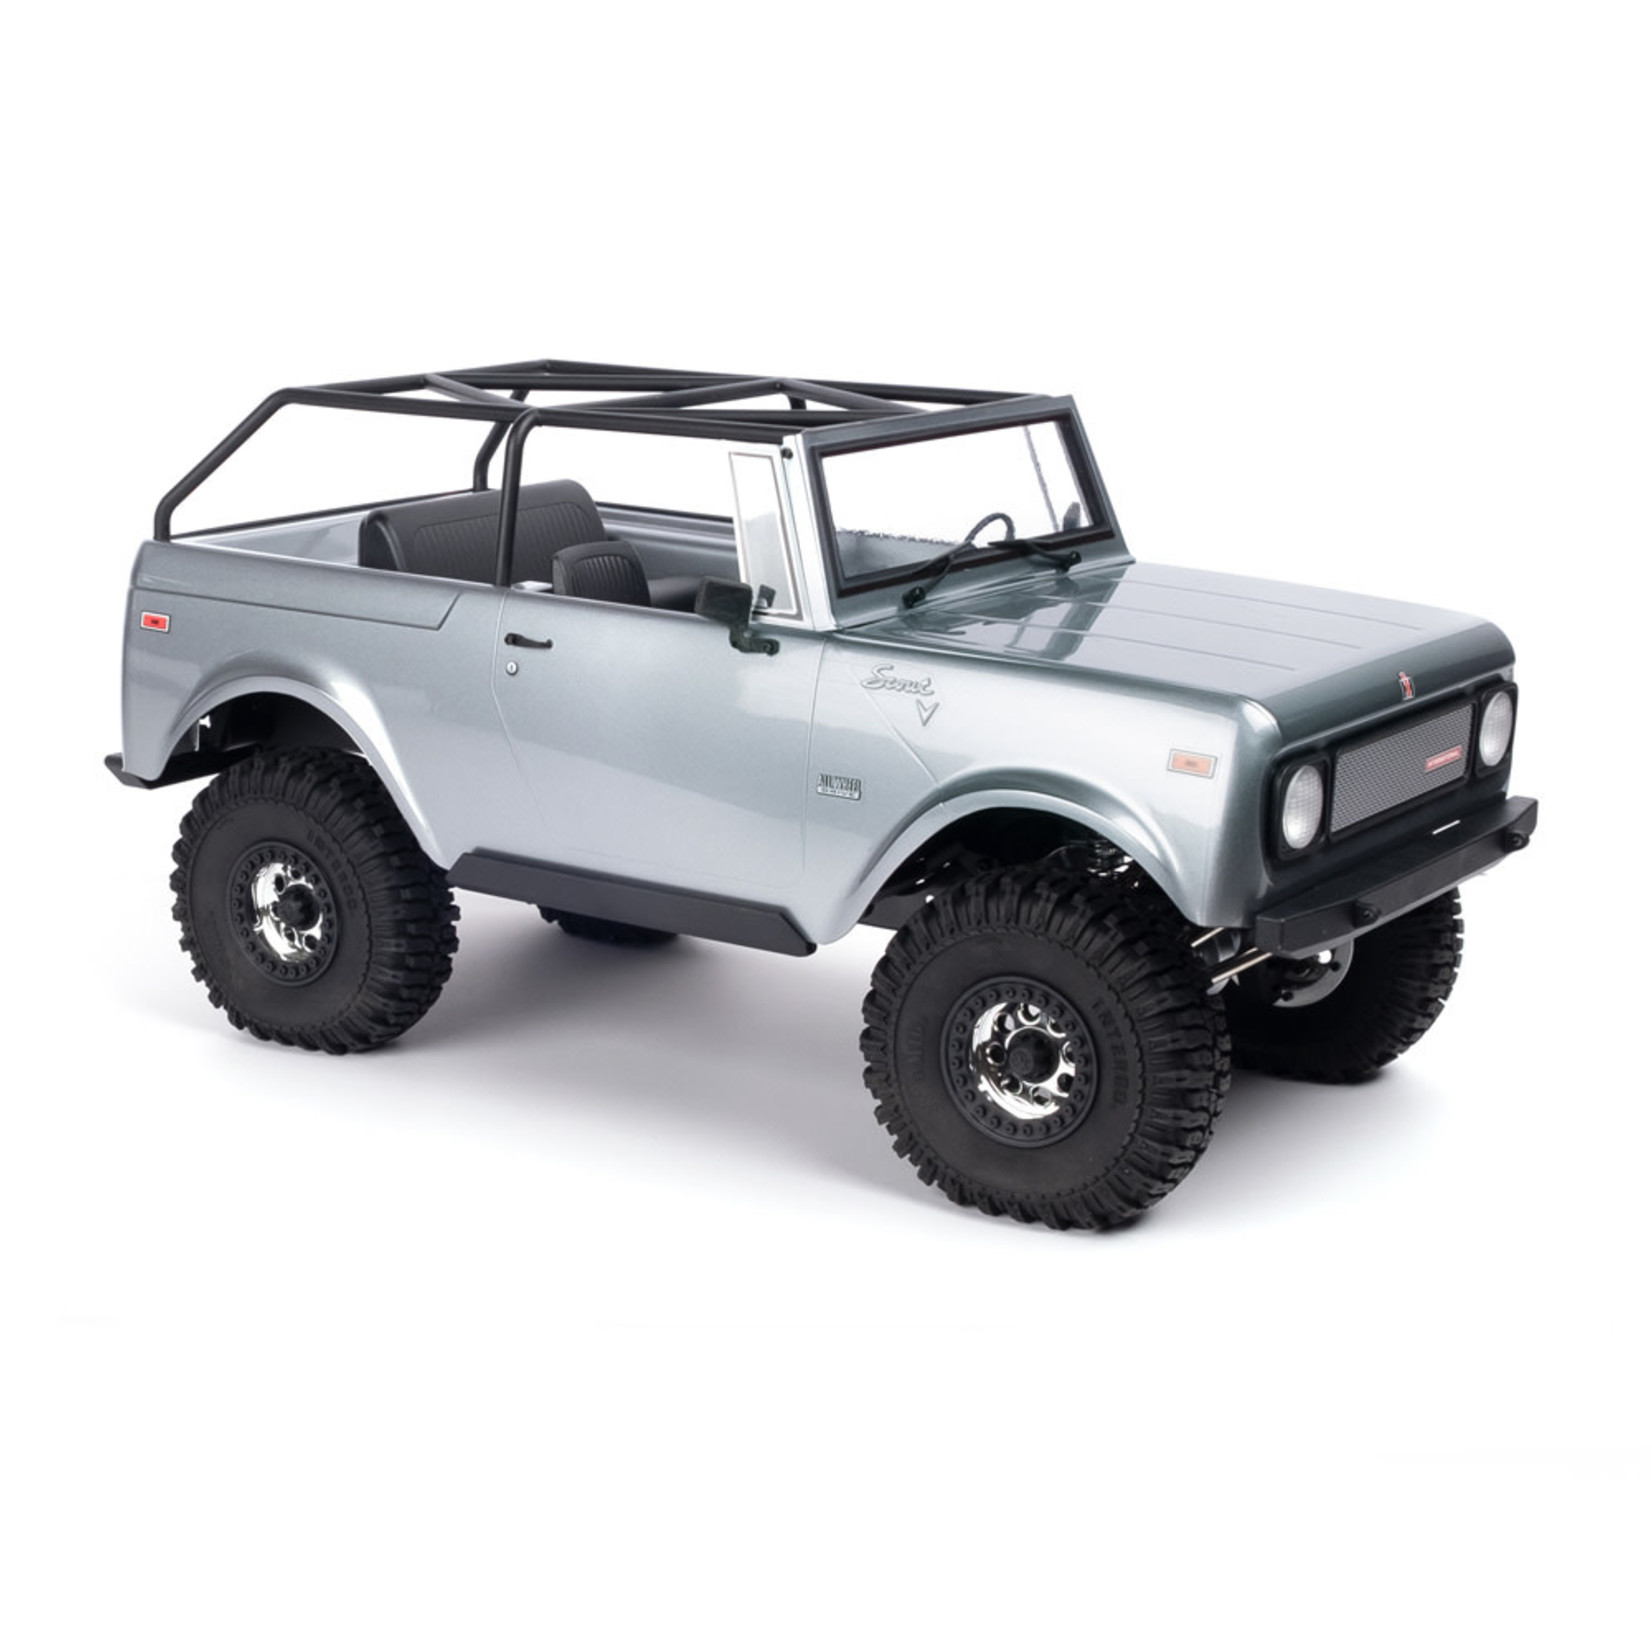 Redcat Racing Redcat Gen9 Scout 800A 1/10 4WD RTR Scale Rock Crawler (Gray) w/2.4GHz Radio #GEN9-GRAY